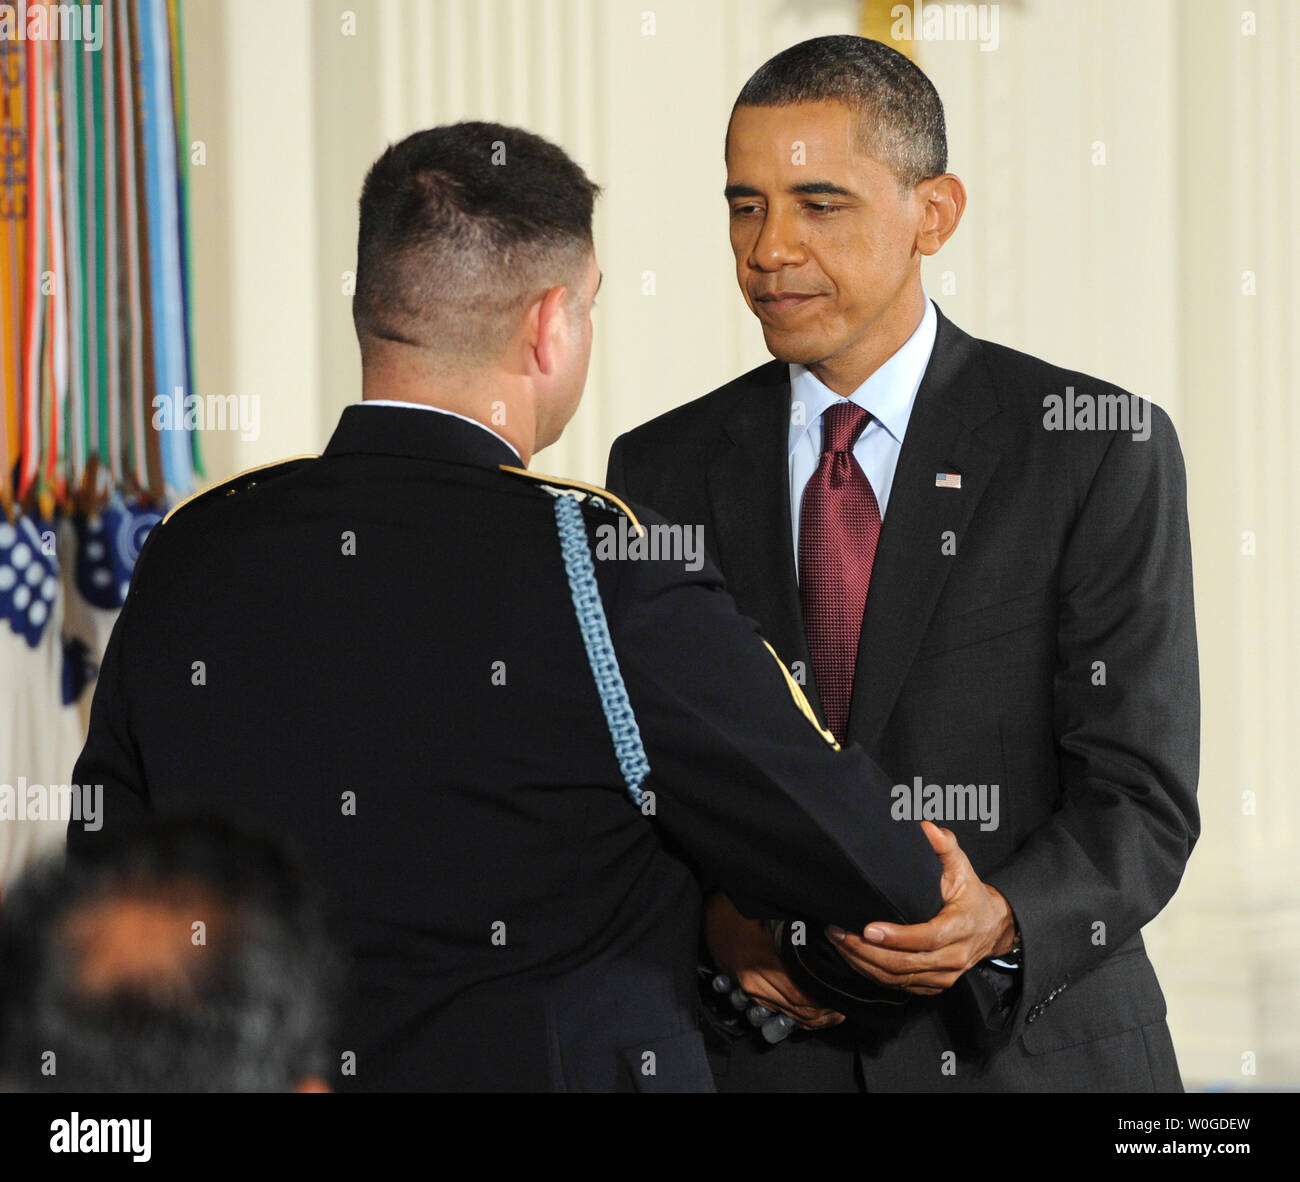 Army Sgt. 1st Class Leroy Arthur Petry applauds during a ceremony at the  White House in